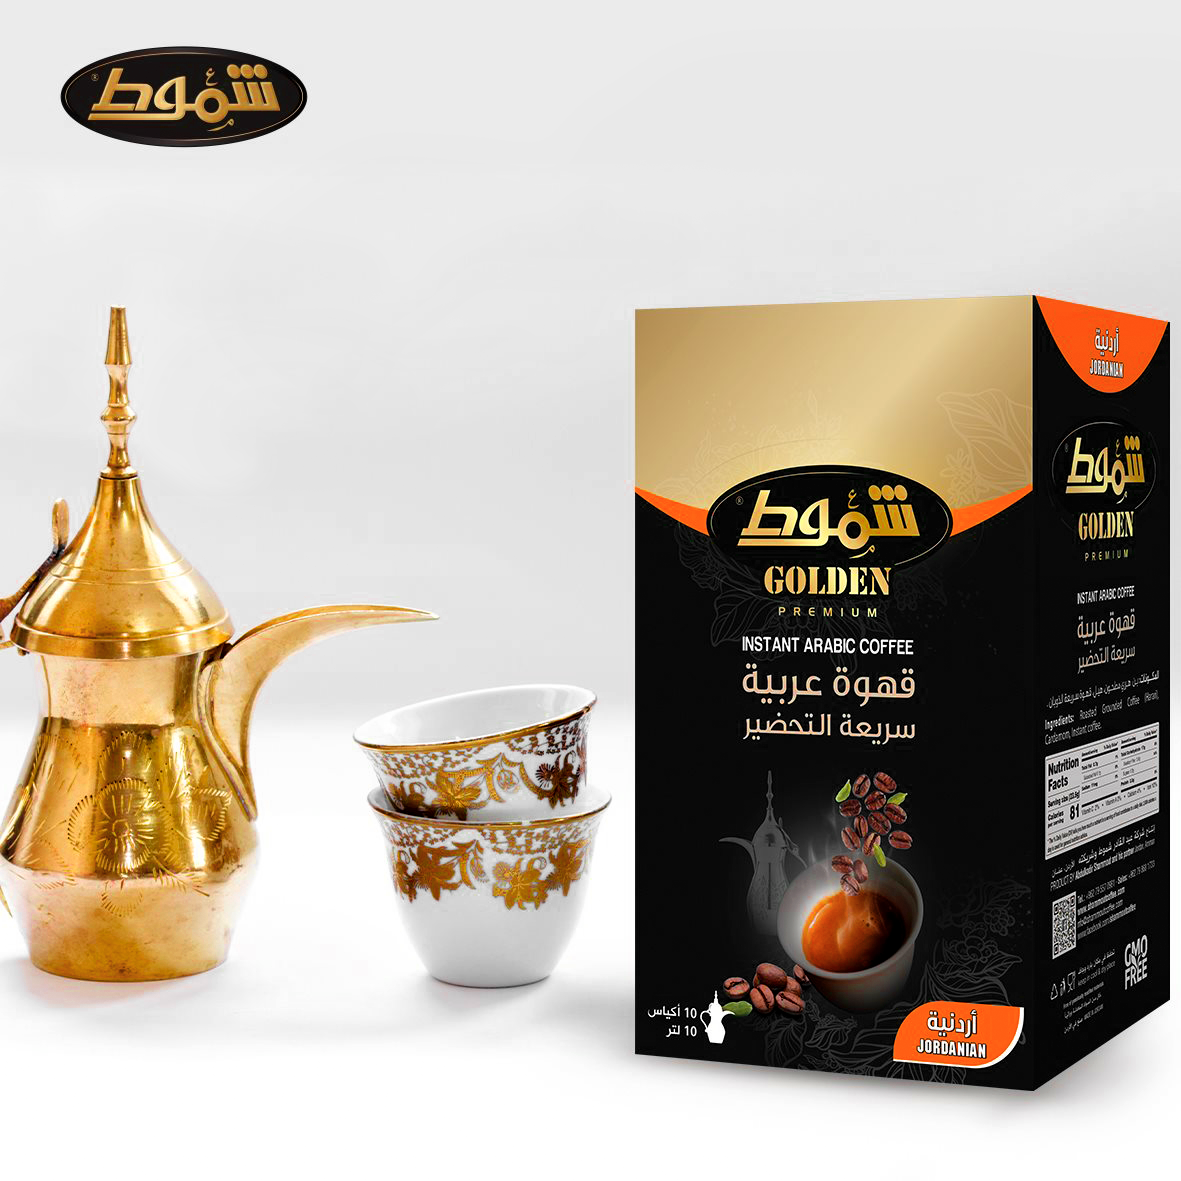 Shammout Jordanian Golden Instant Coffee Pack with Pots